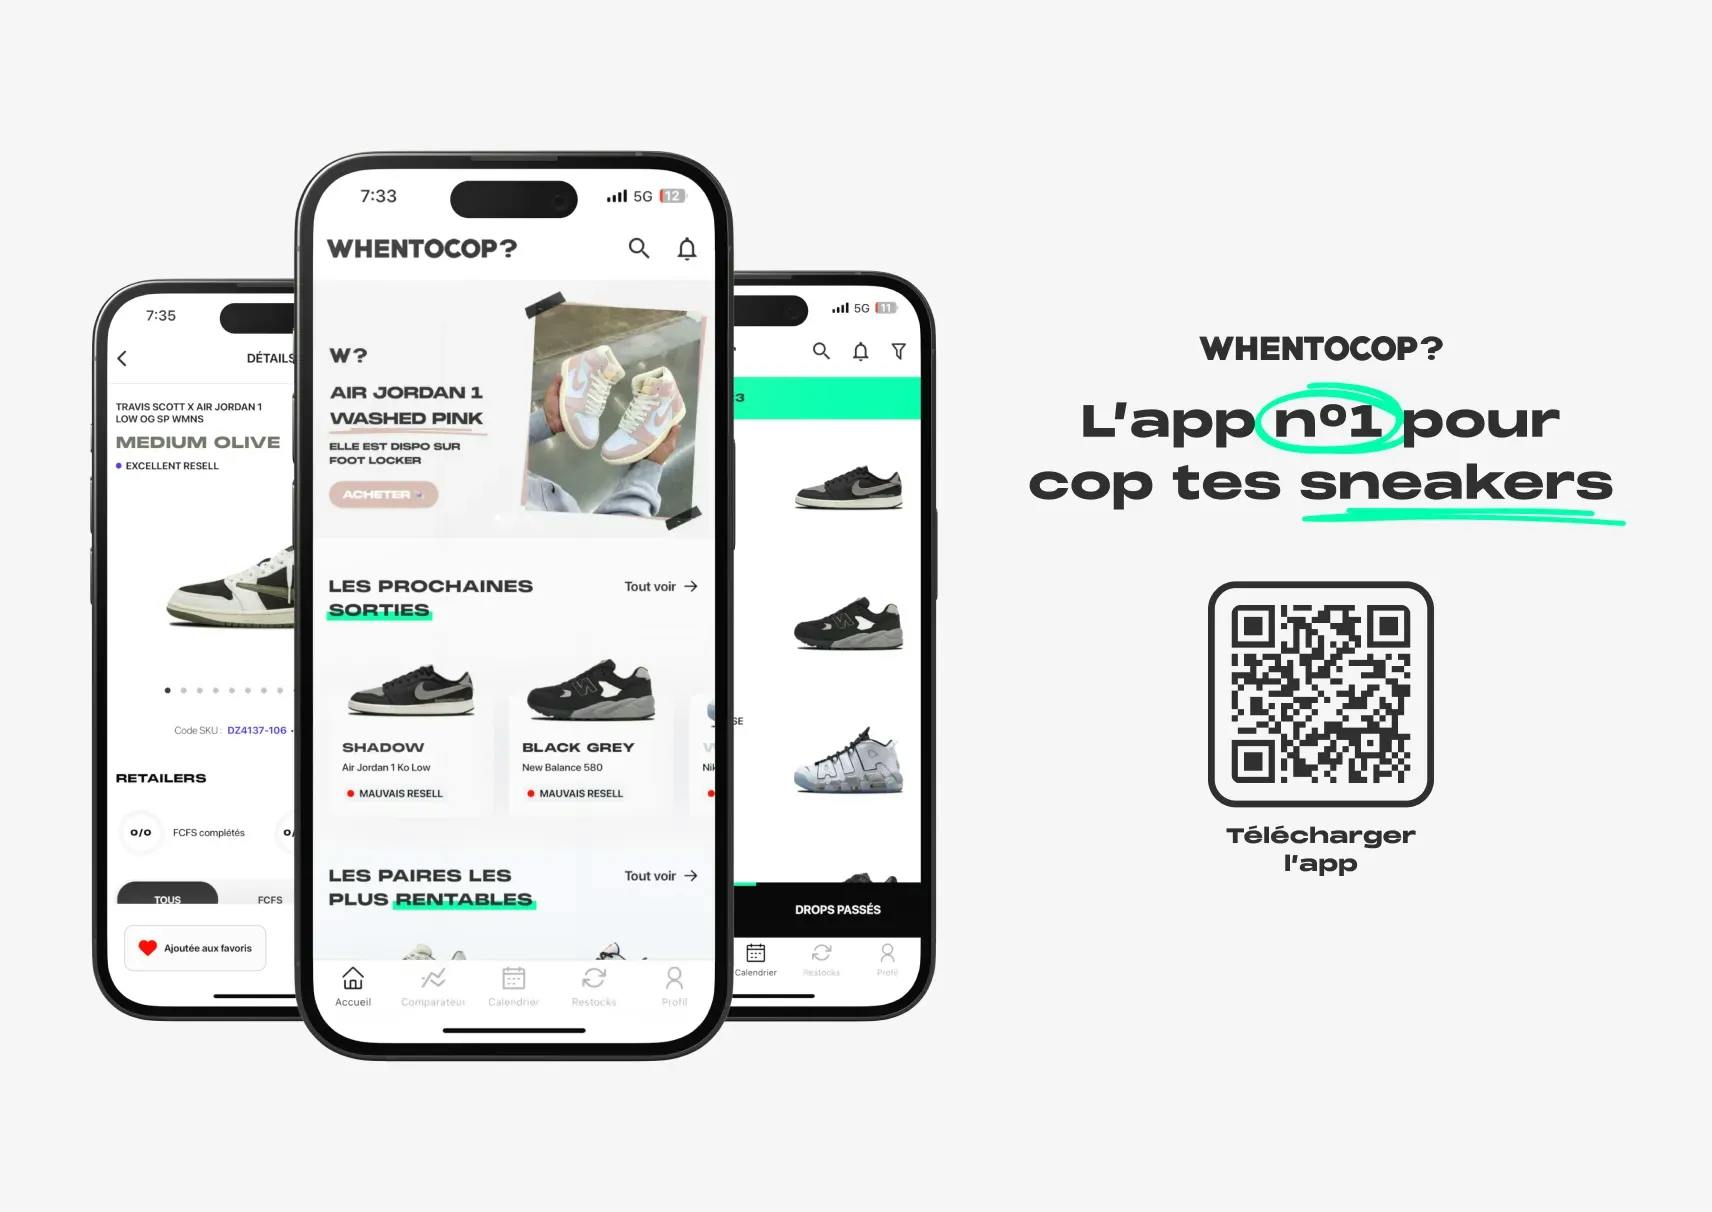 Large Visual App Promo Whentocop